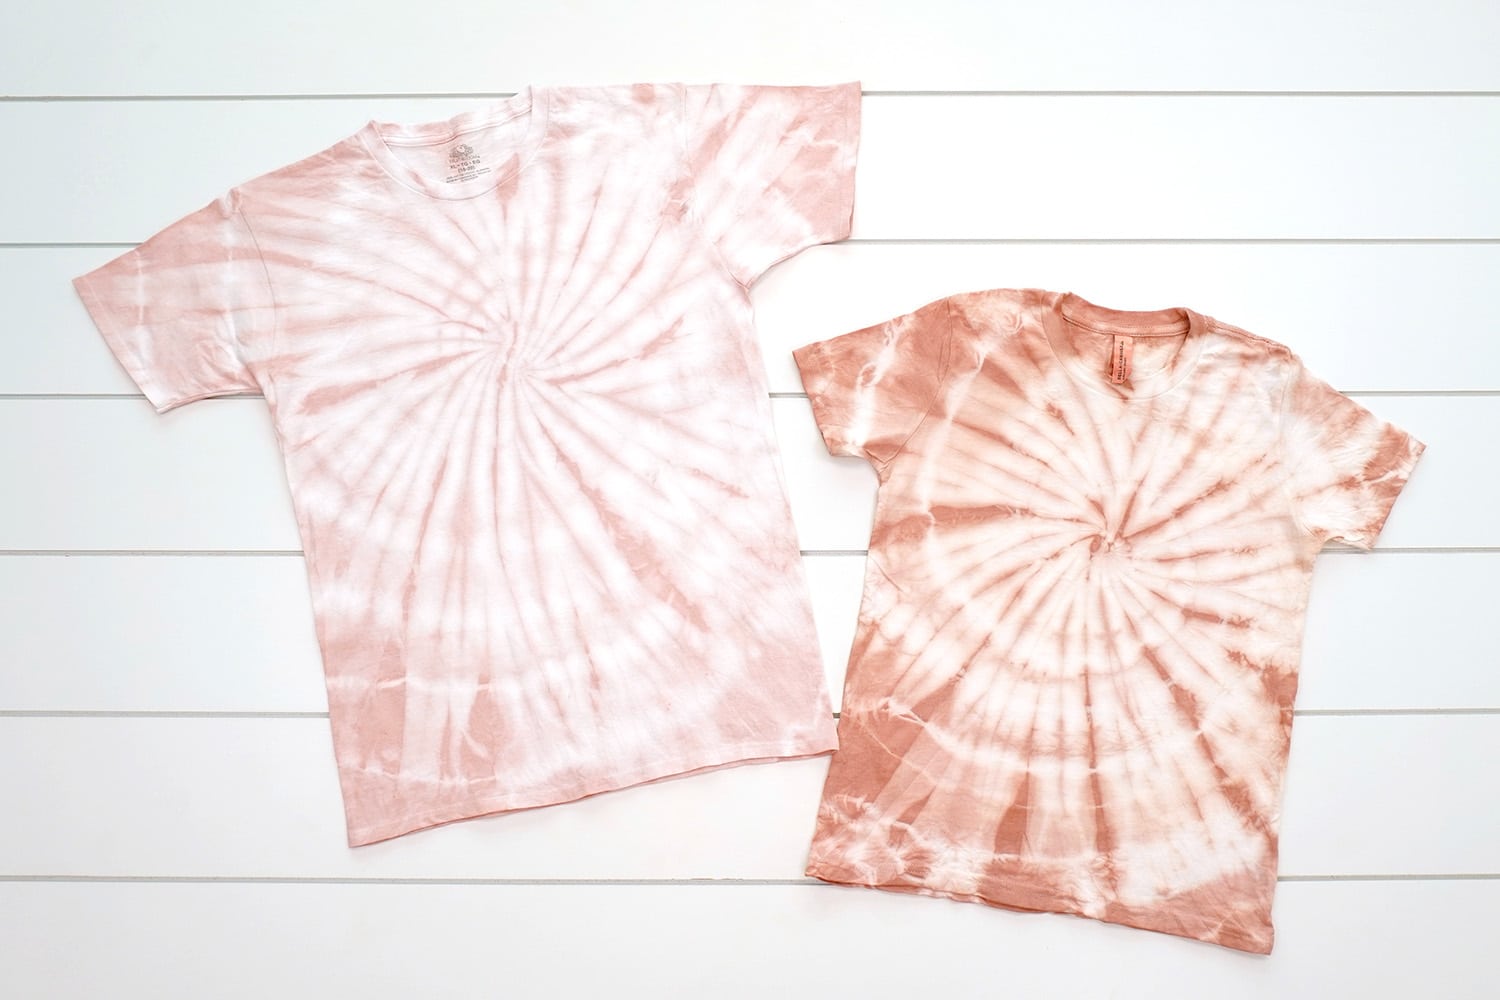 two spiral tie-dye shirts on a white background, one blush pink color and one a peachy pink